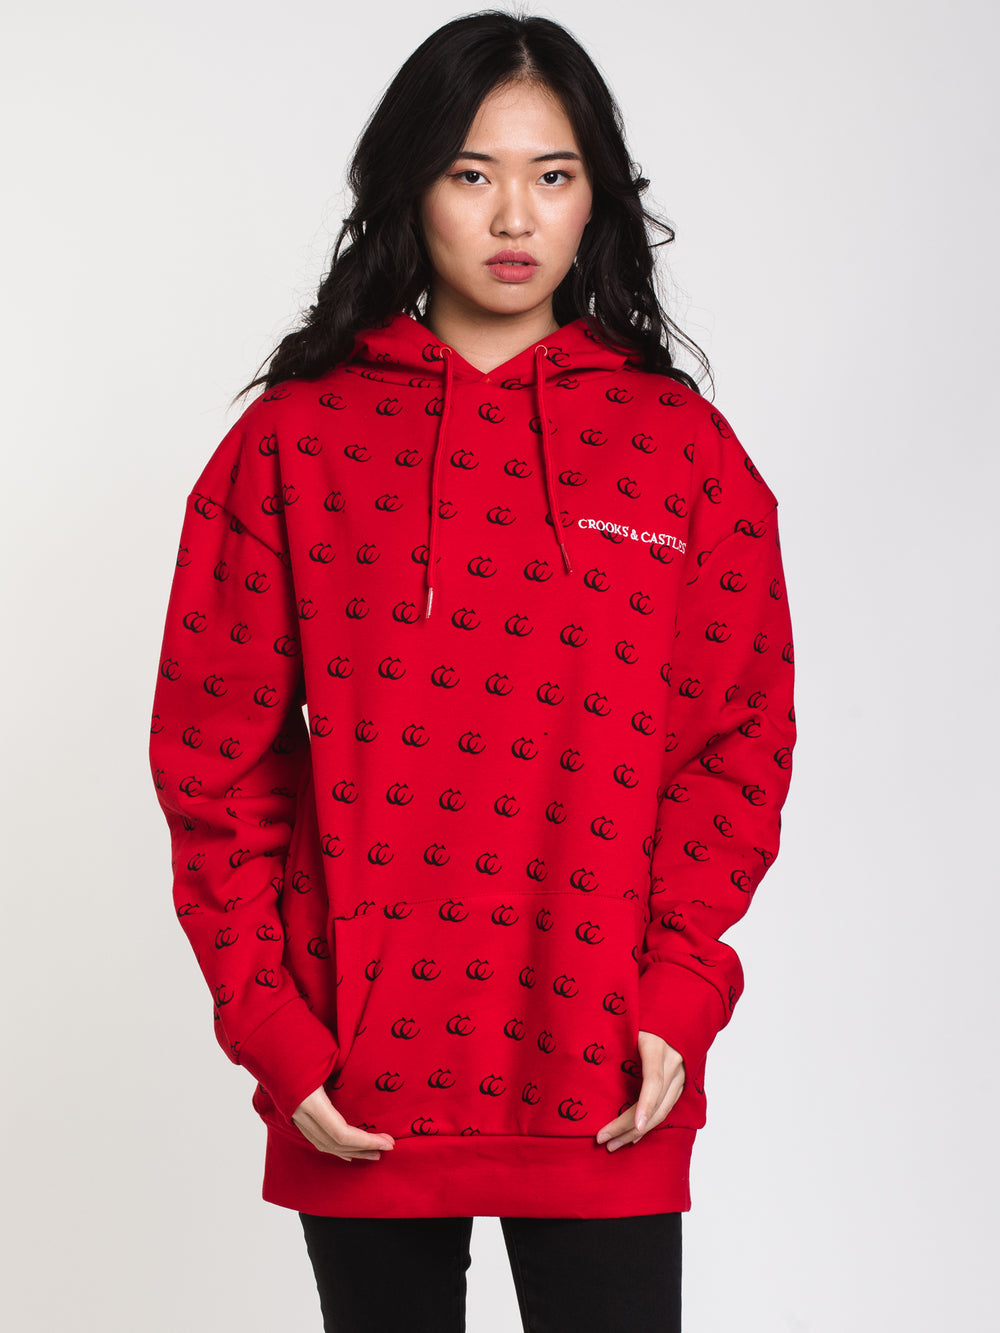 C&amp;C ALL OVER PRINT HOODIE FLEECE - RED - CLEARANCE